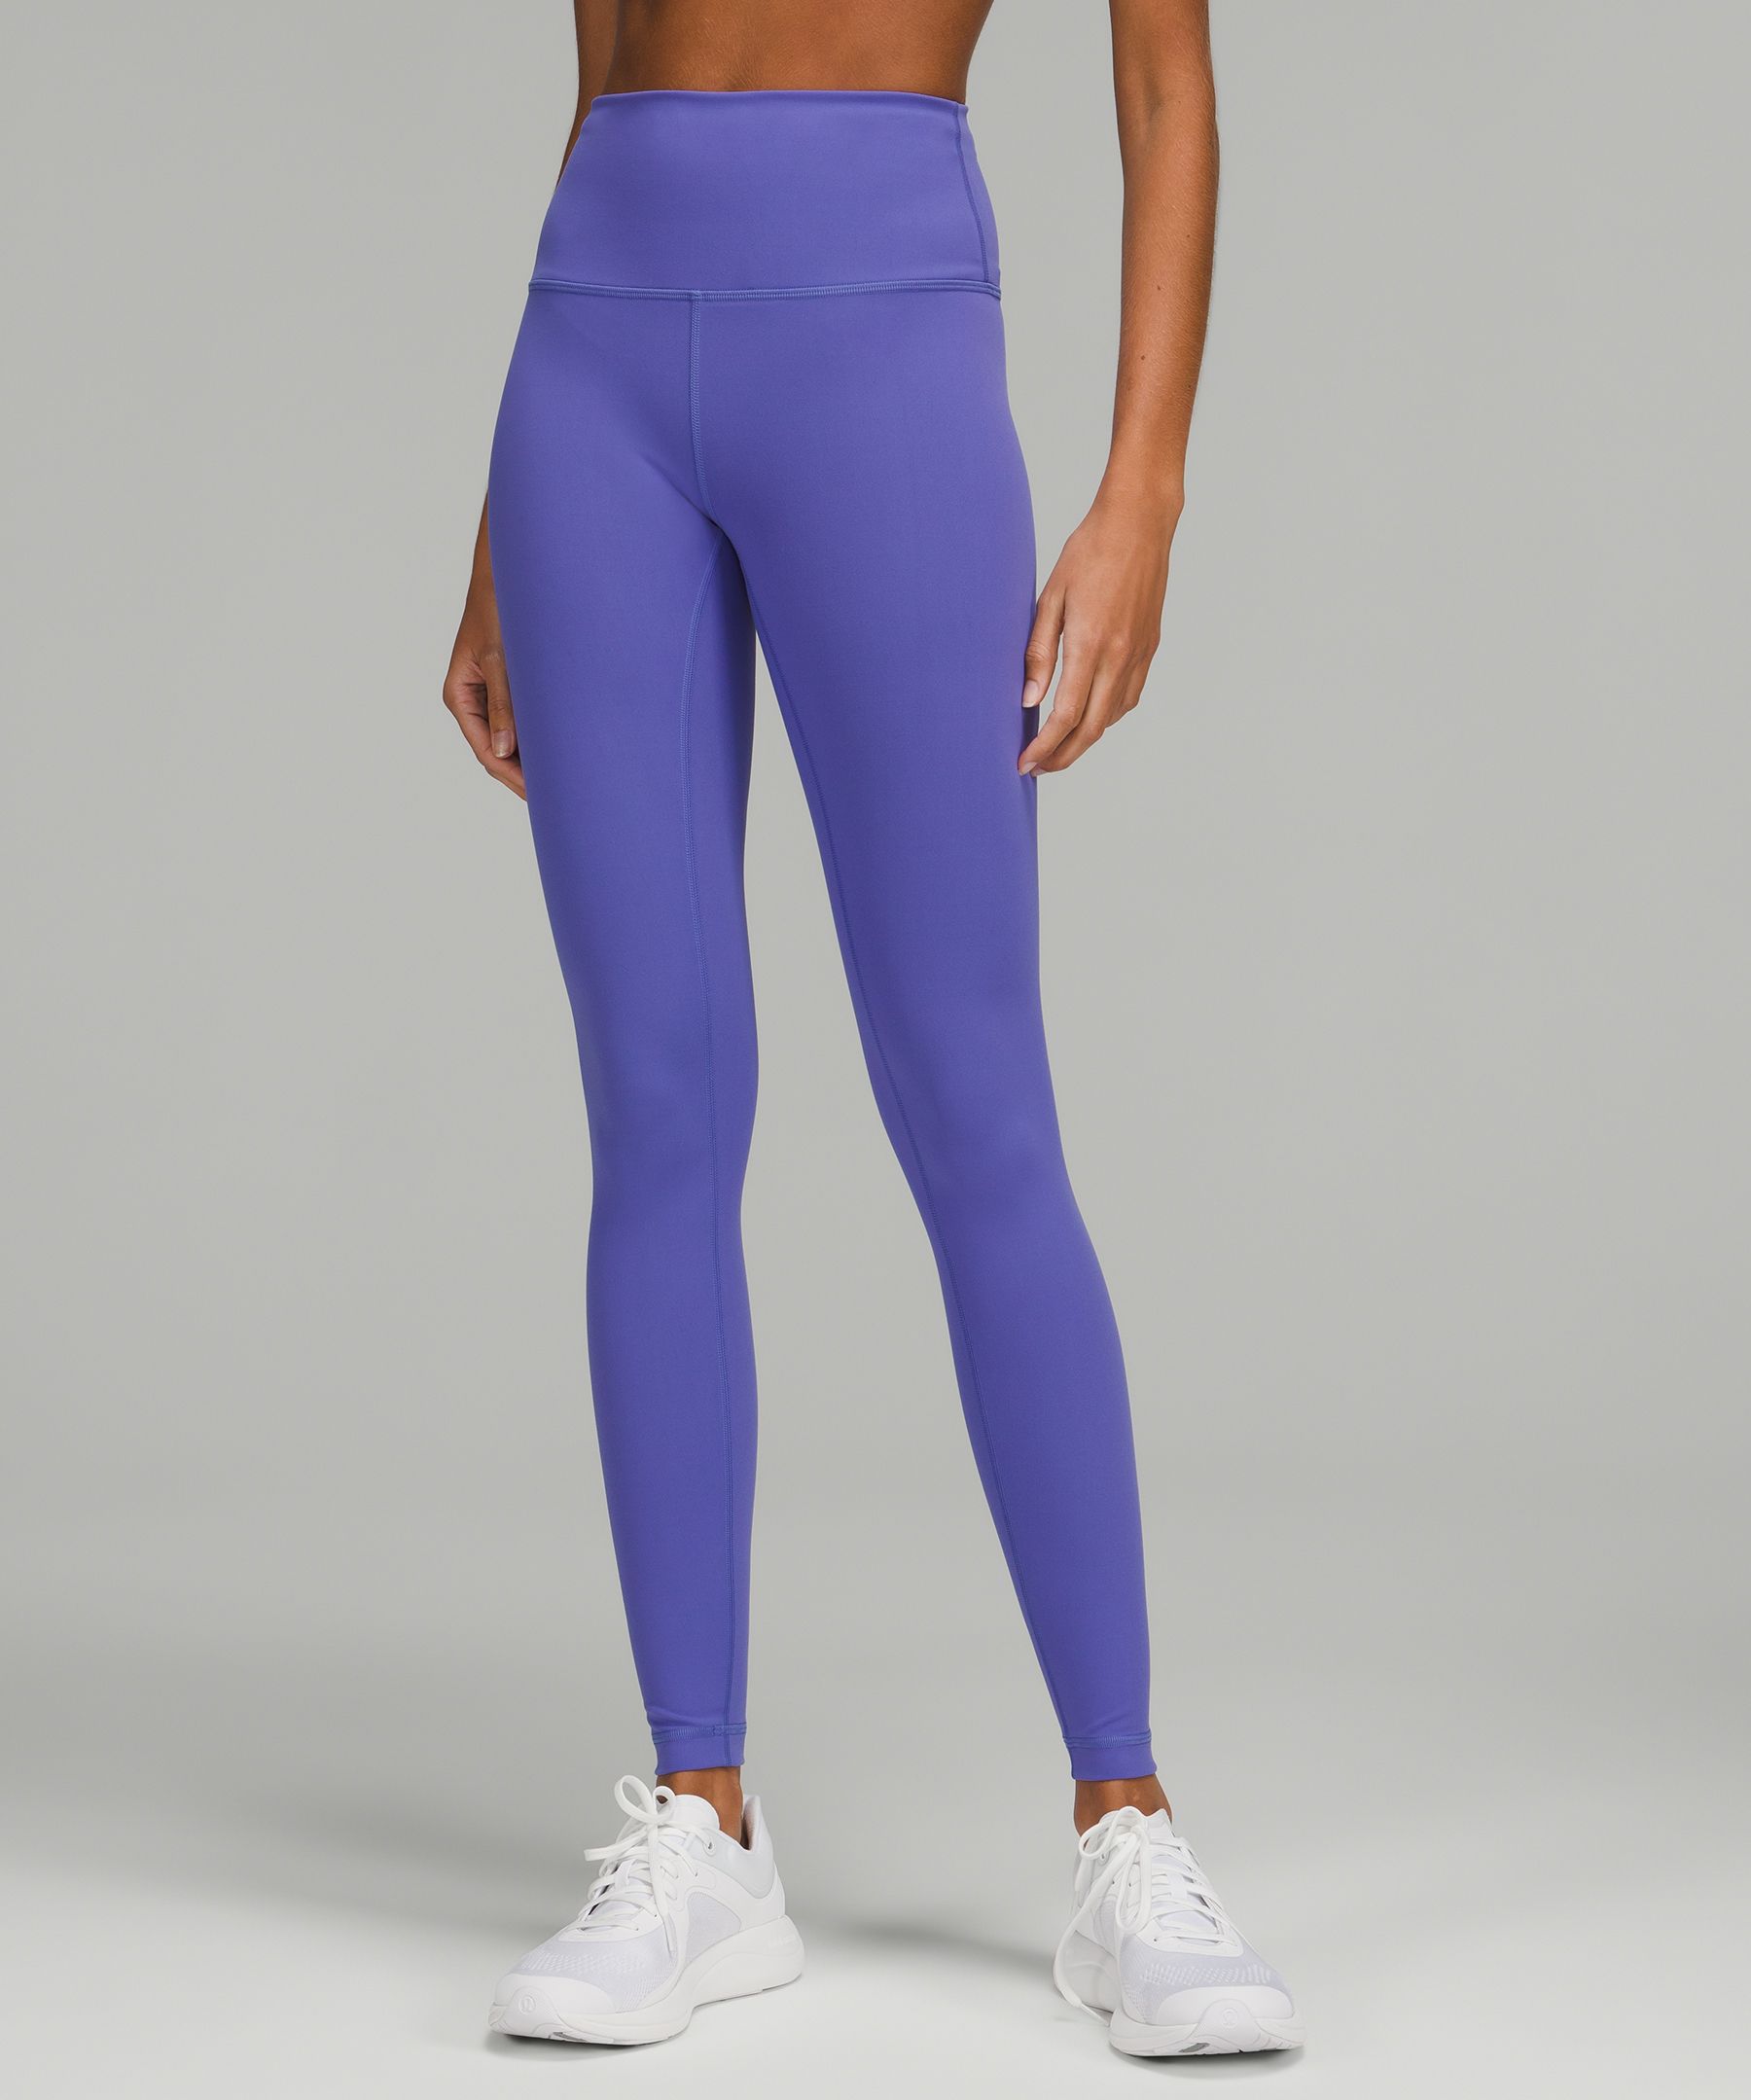 Lululemon Wunder Train High-rise Tights 28" In Charged Indigo